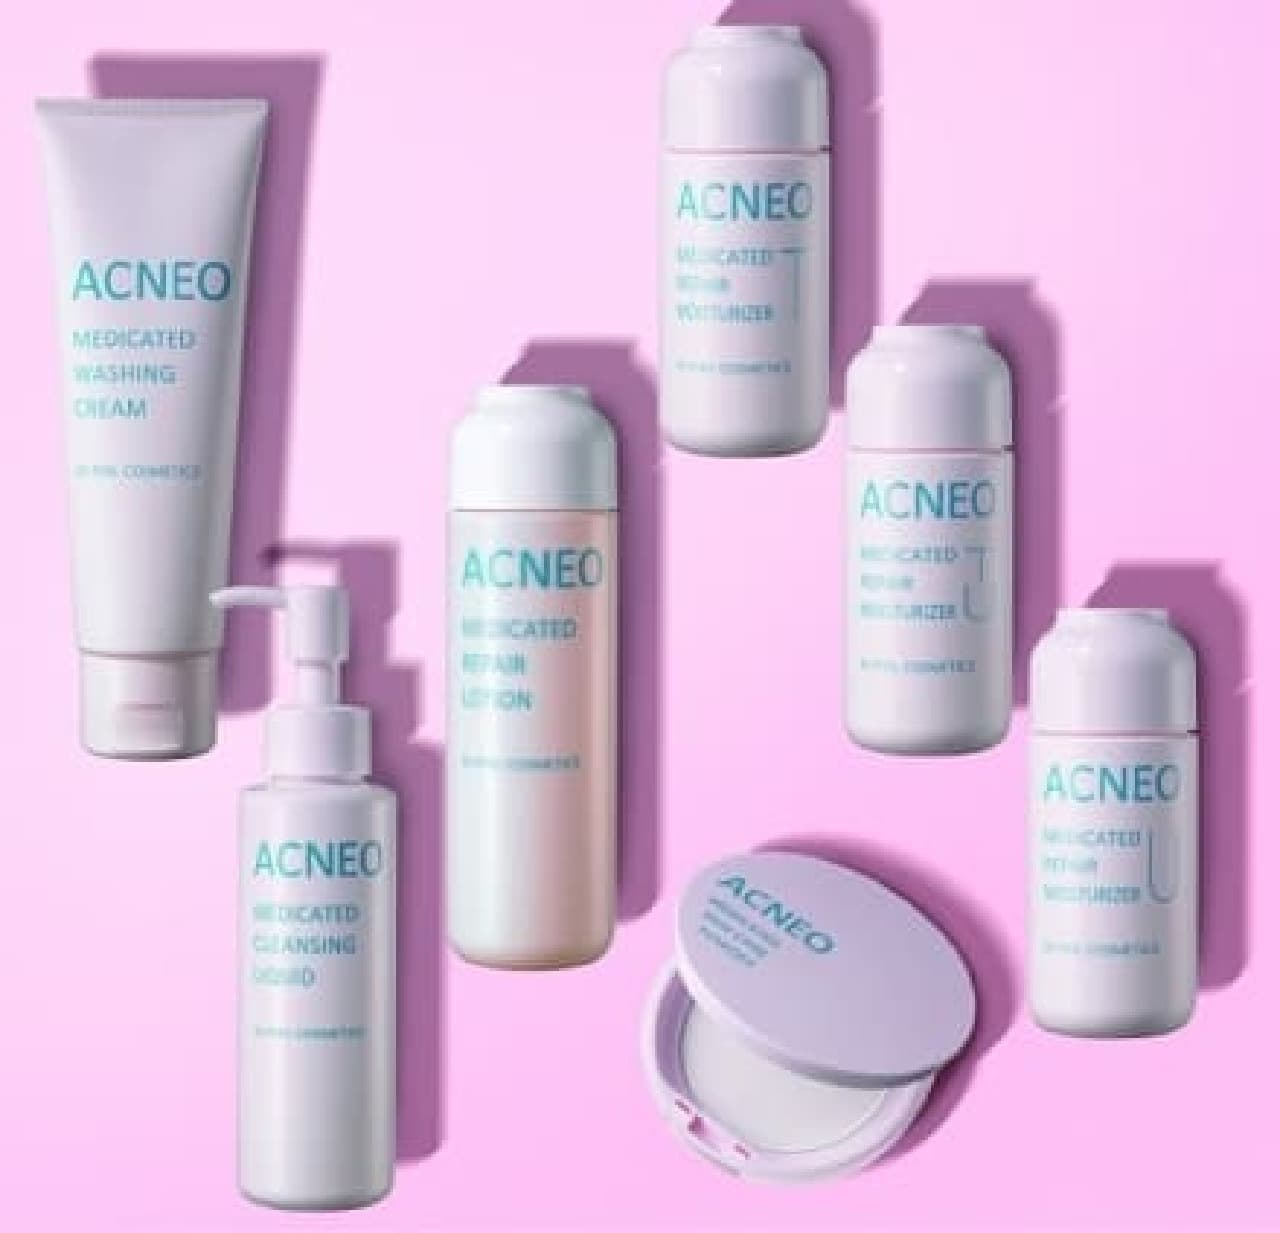 Personal acne care series "Formule Acneo"